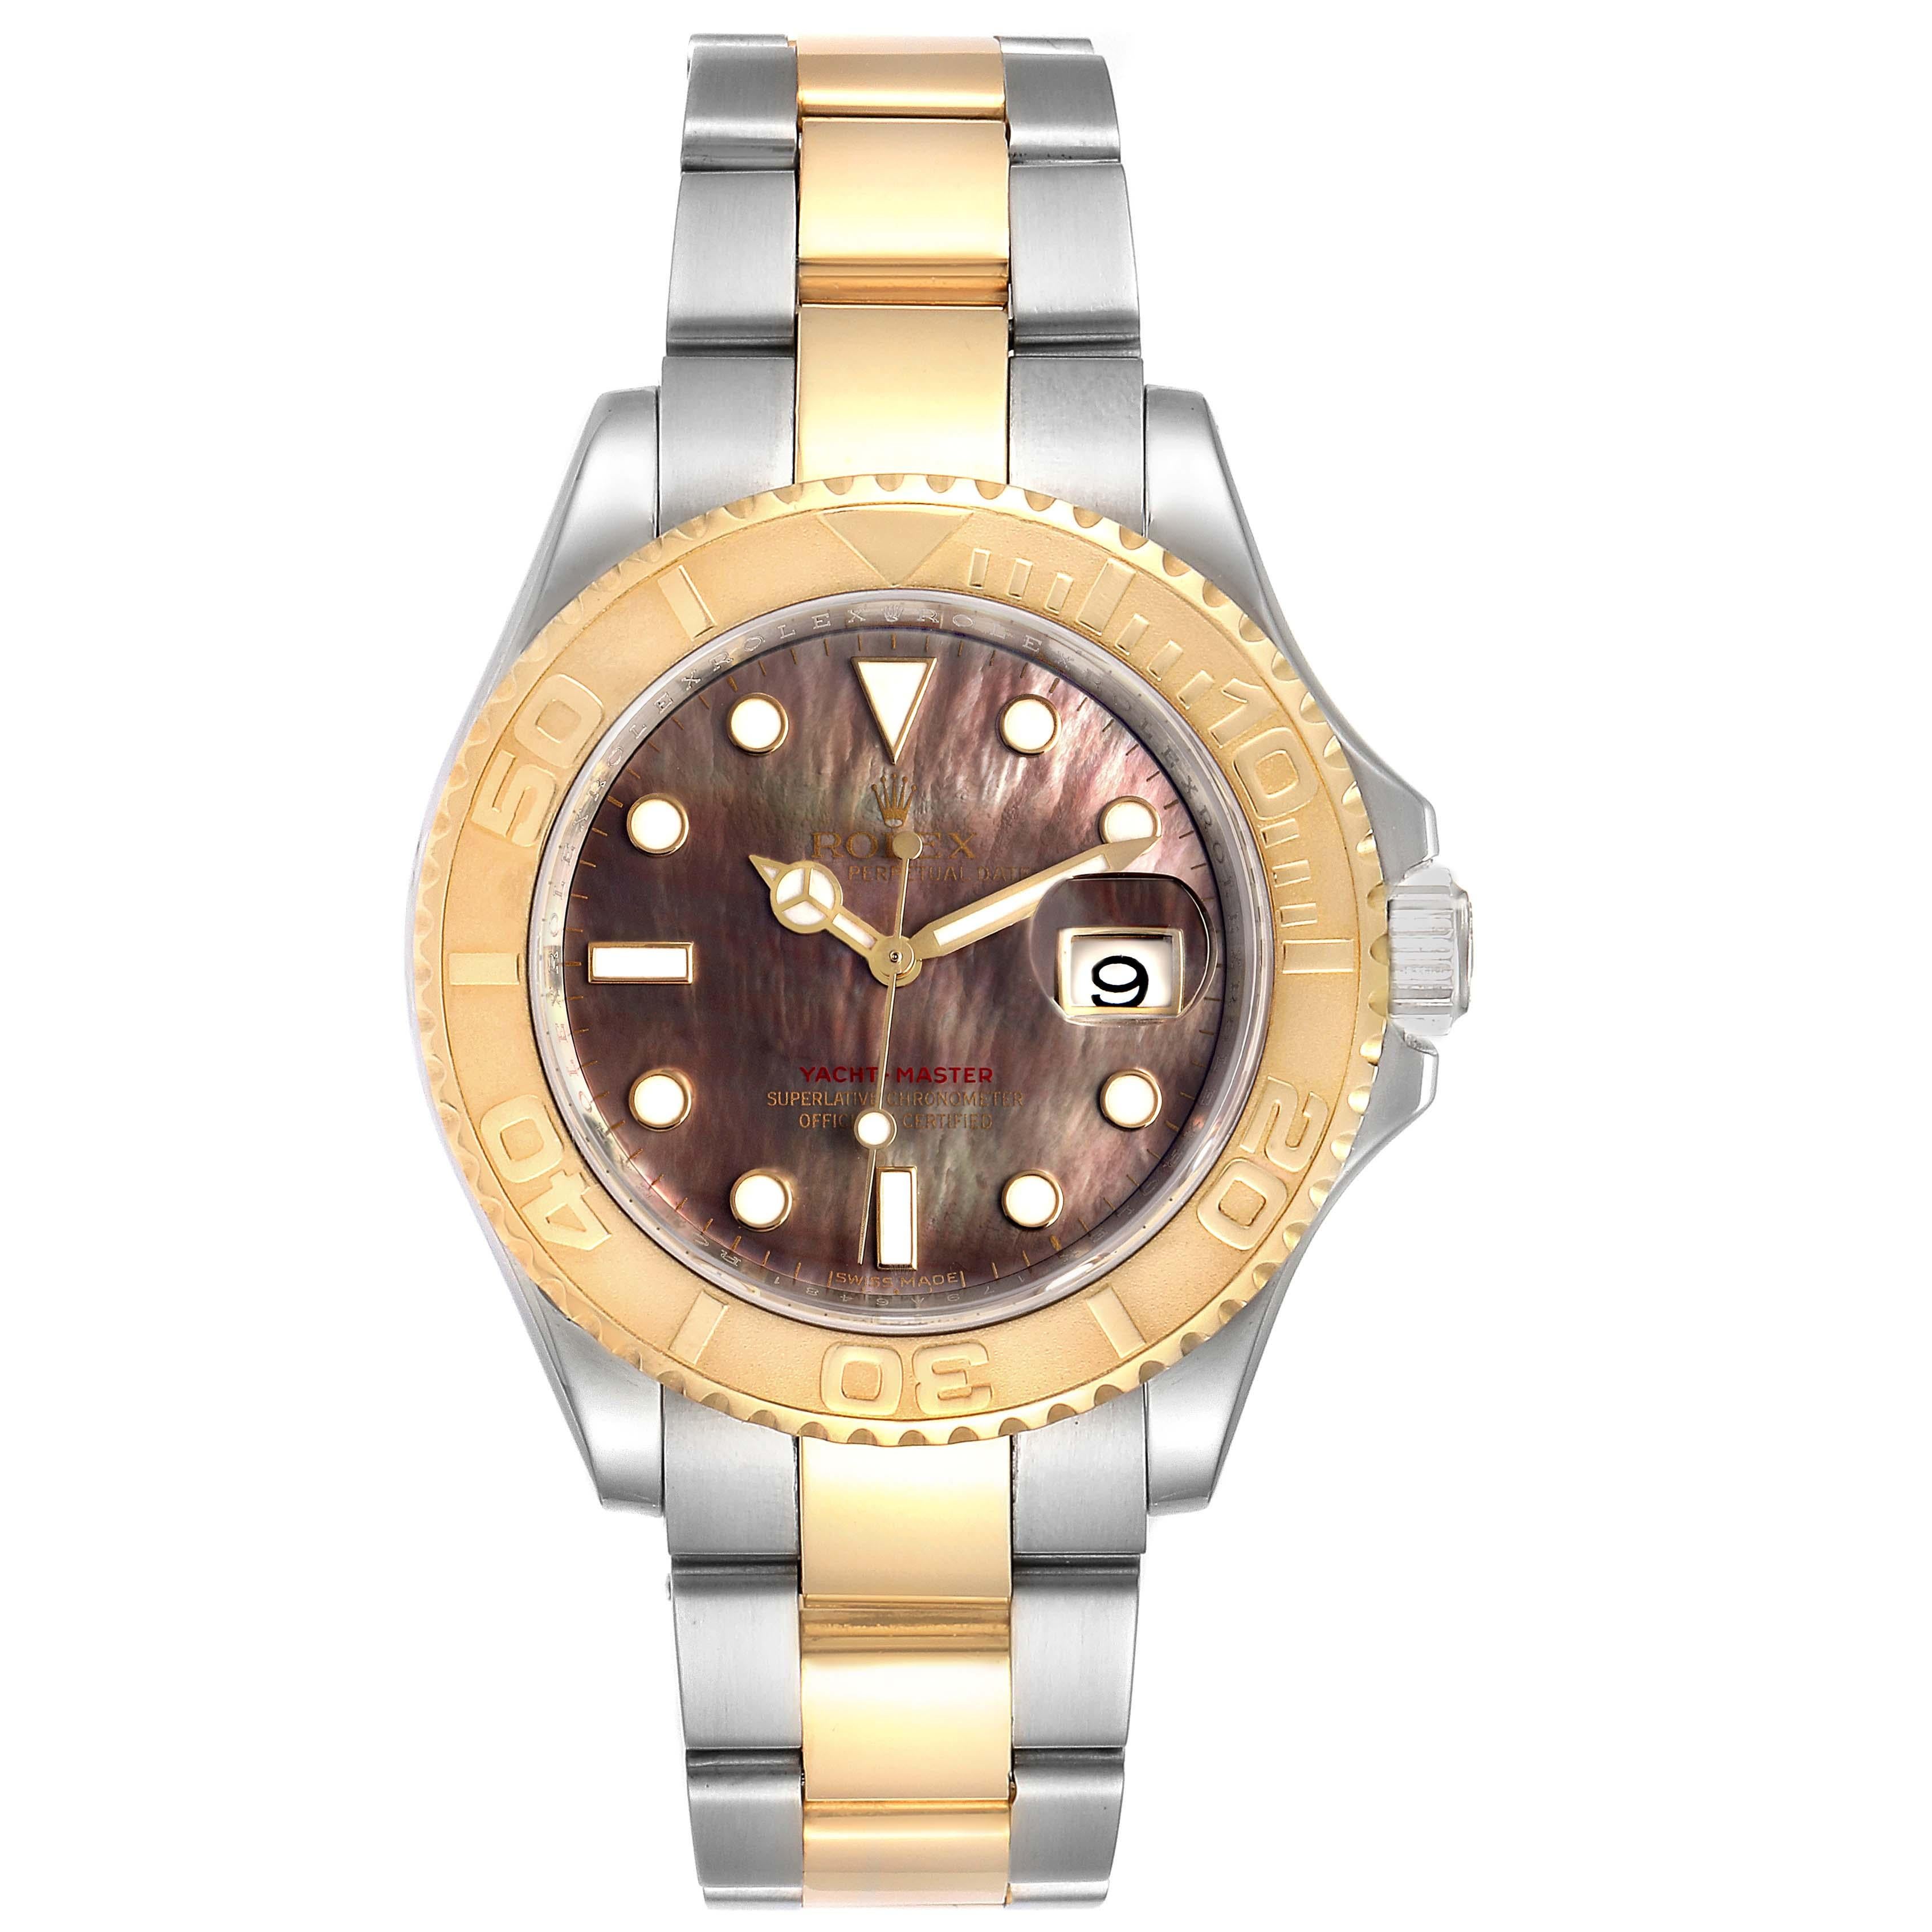 Rolex Yachtmaster 40 Steel Yellow Gold MOP Mens Watch 16623 Box Card. Officially certified chronometer self-winding movement. Stainless steel case 40 mm in diameter. Rolex logo on a crown. 18k yellow gold special time-lapse unidirectional rotating